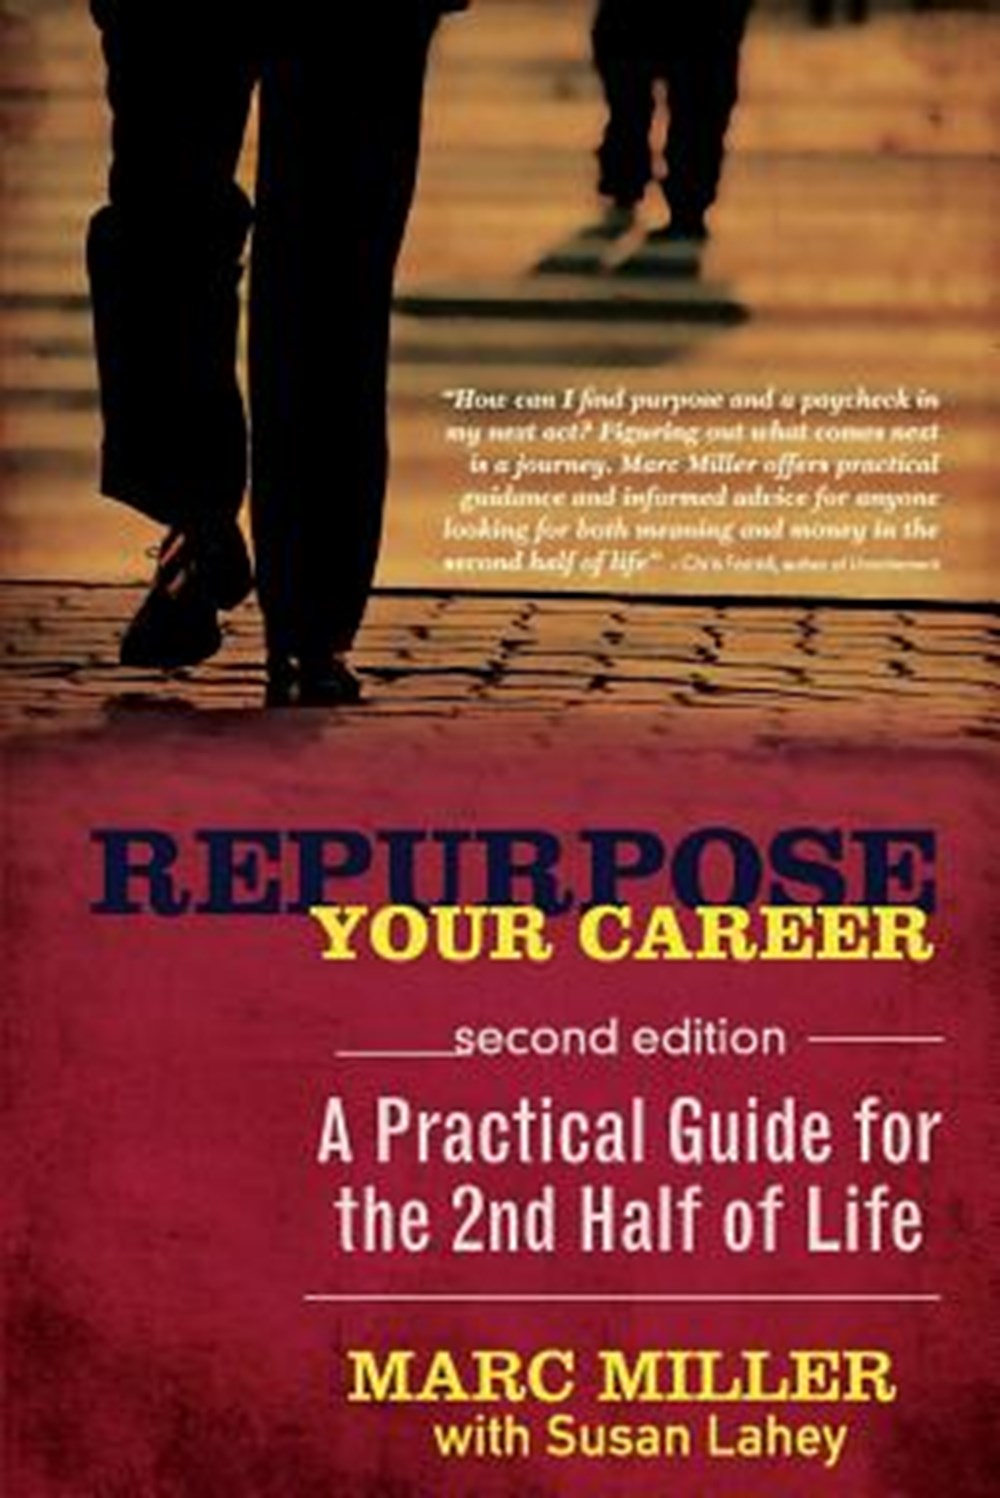 Repurpose Your Career A Practical Guide for the 2nd Half of Life